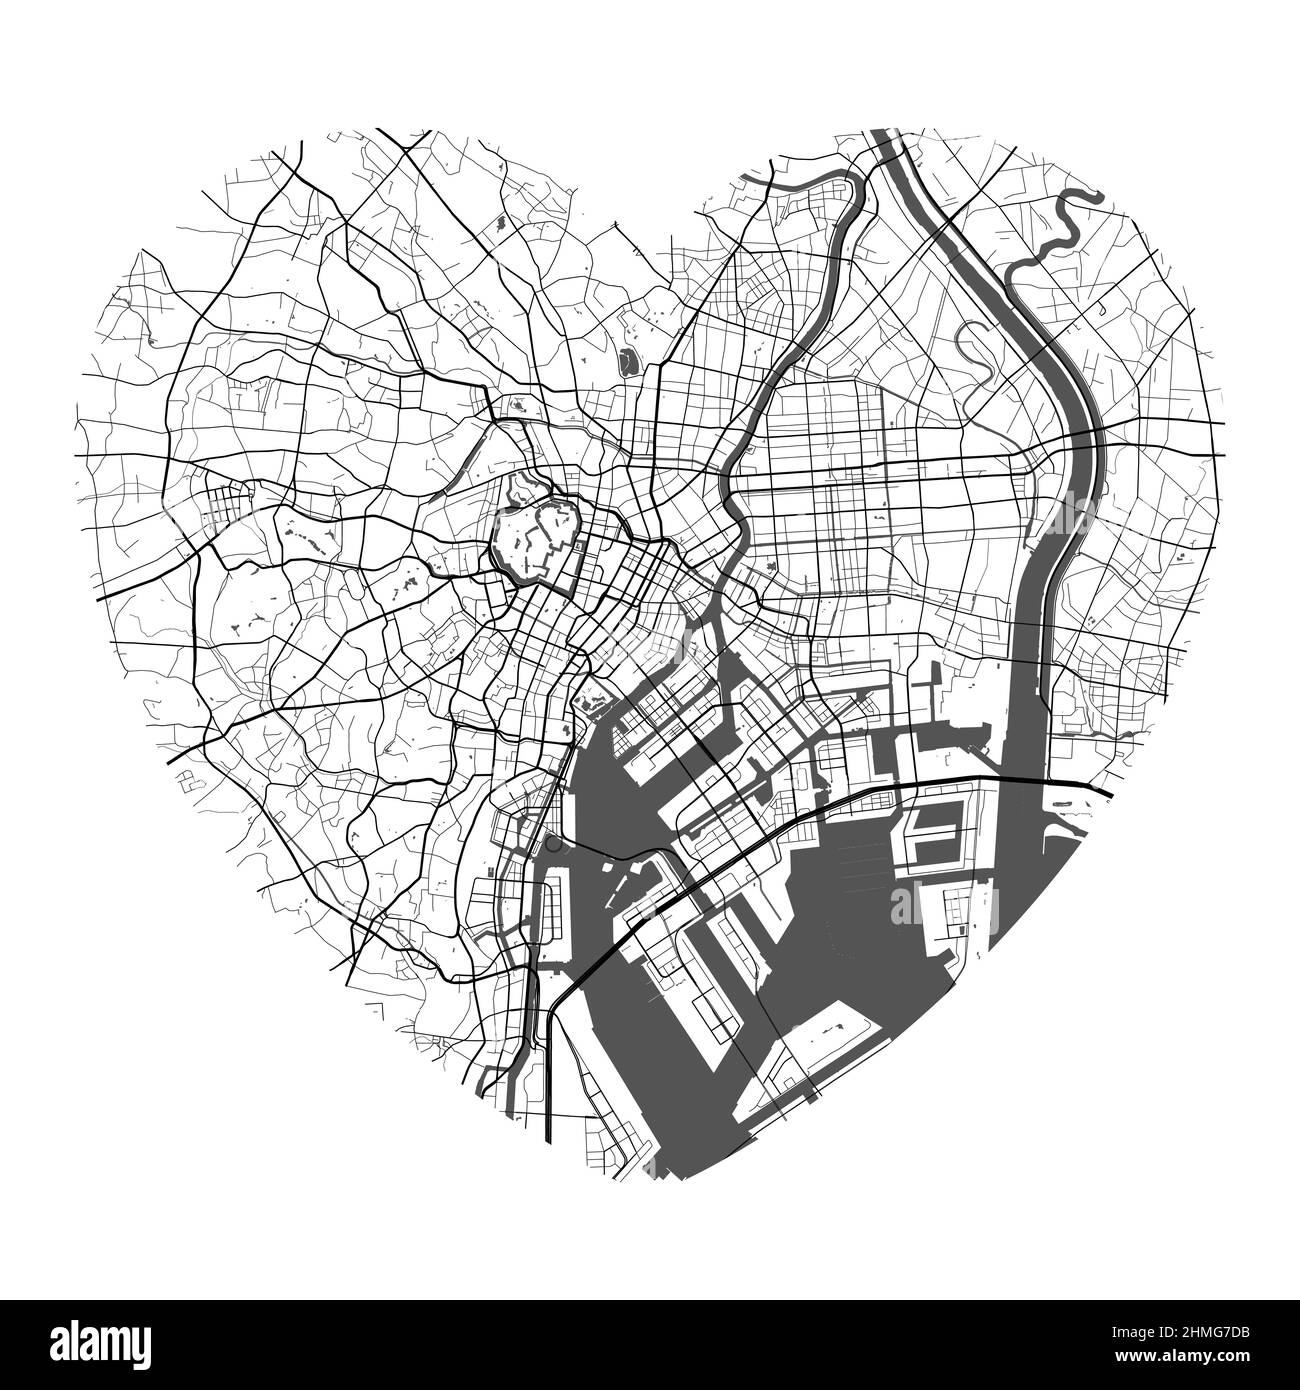 Heart shaped Tokyo city vector map. Black and white colors illustration. Roads, streets, rivers. Stock Vector